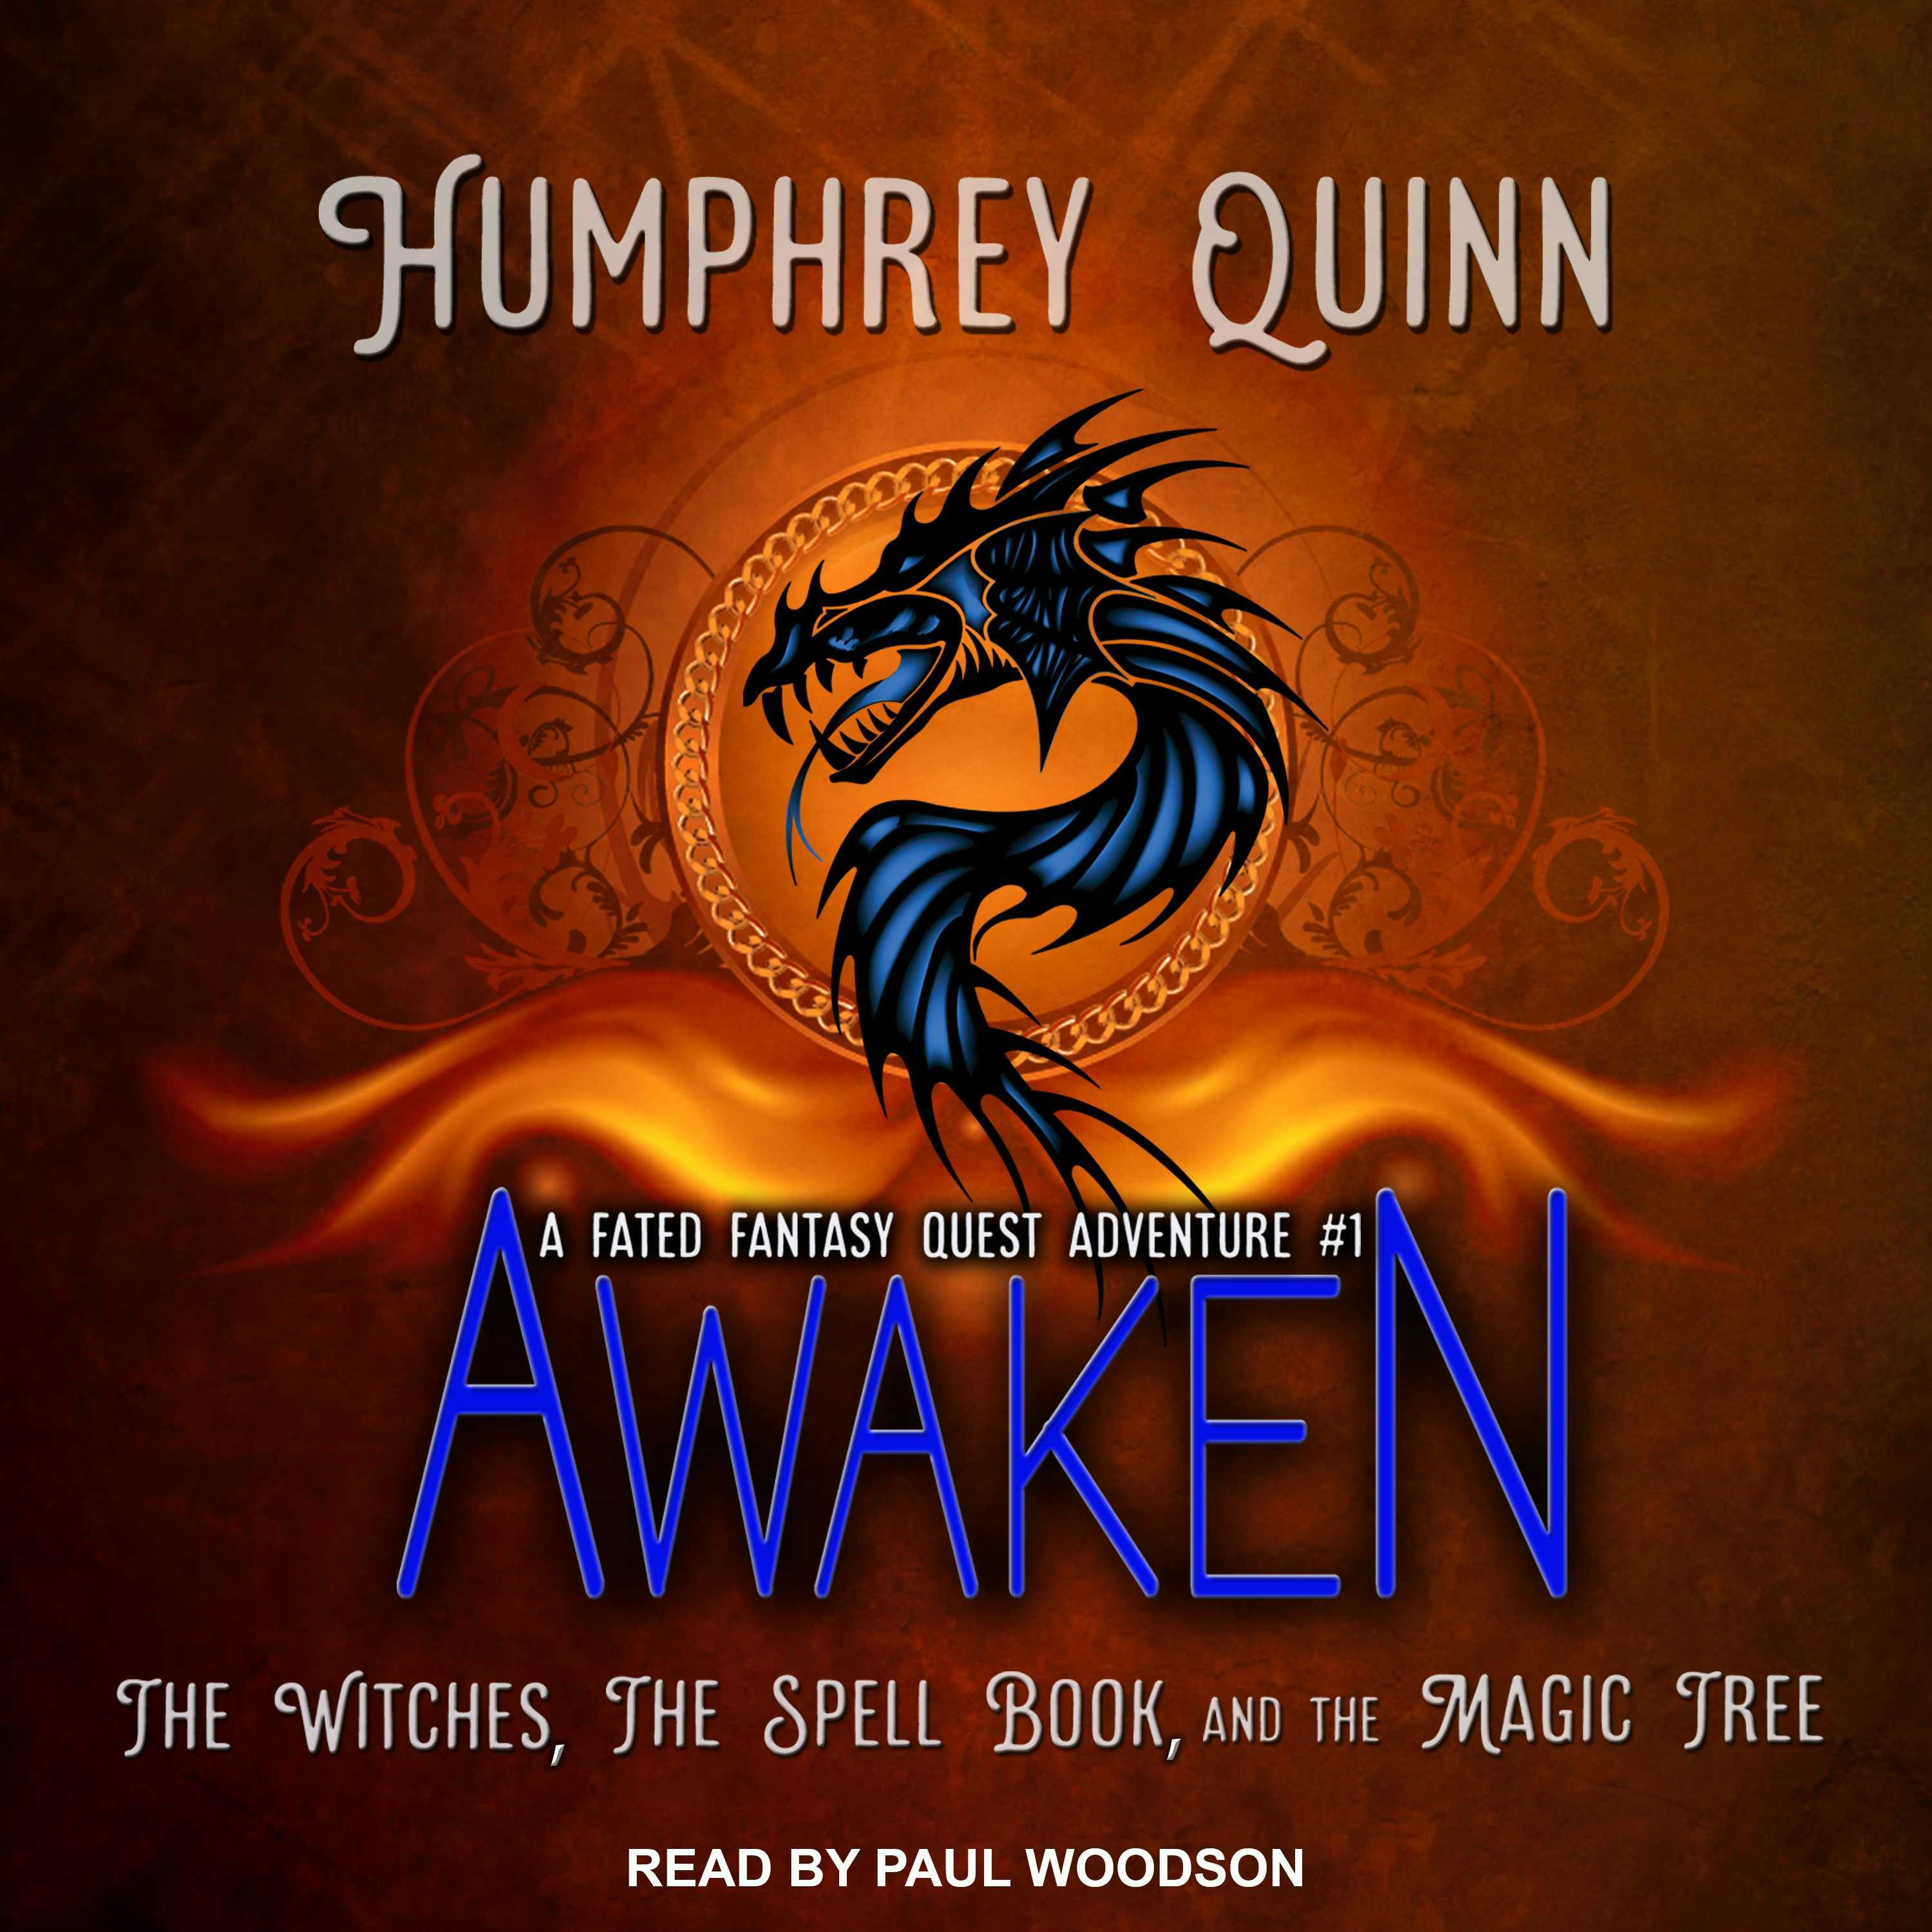 Awaken: The Witches, The Spell Book, and The Magic Tree - Humphrey Quinn